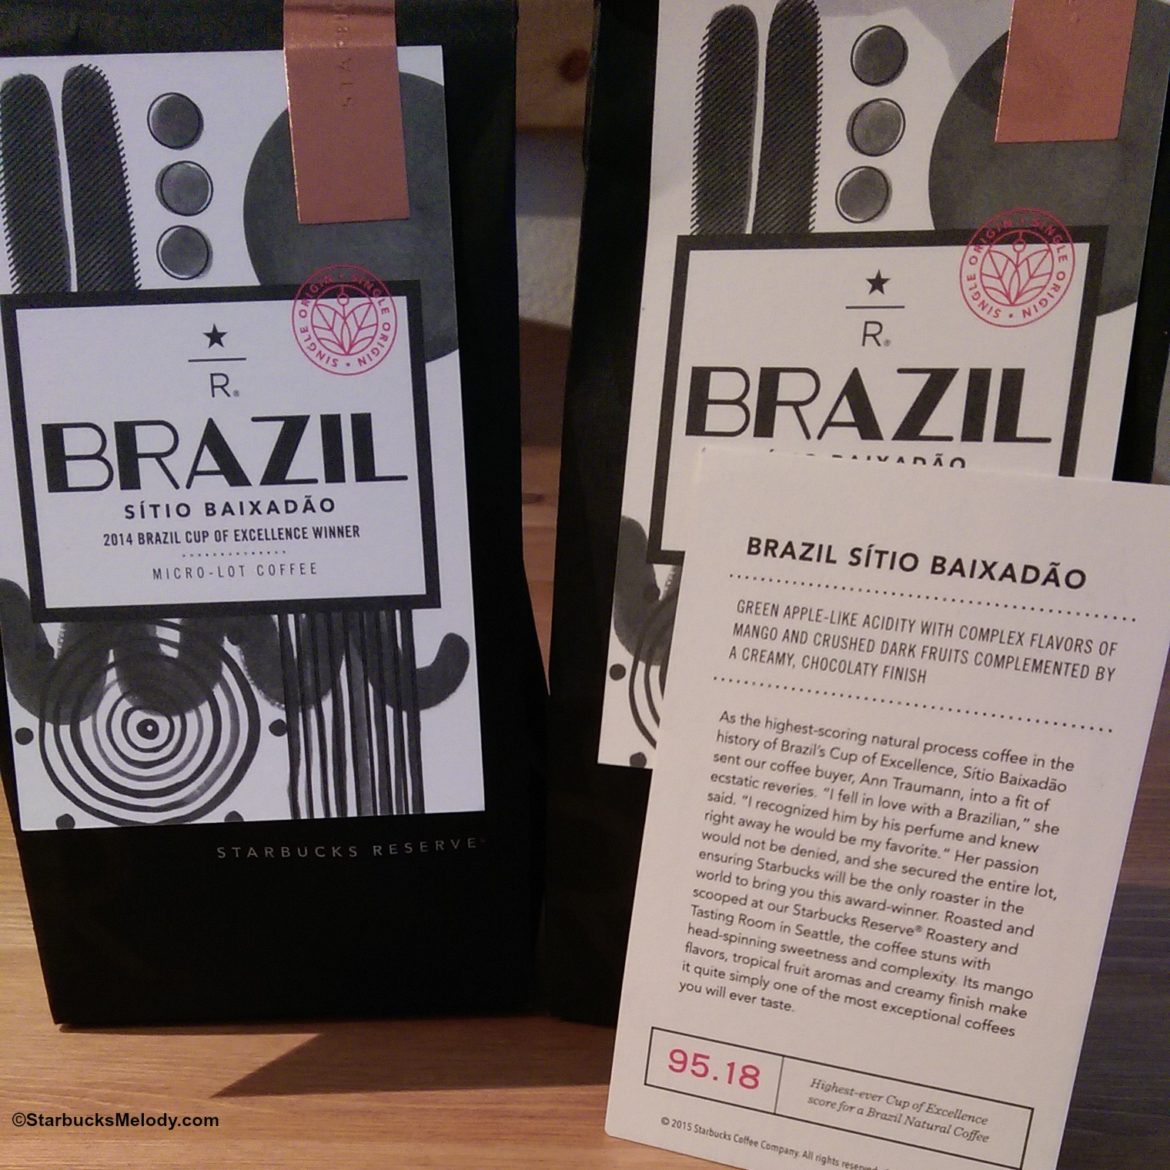 Starbucks offers its first Cup of Excellence winning coffee: Brazil Sitio Baixadao